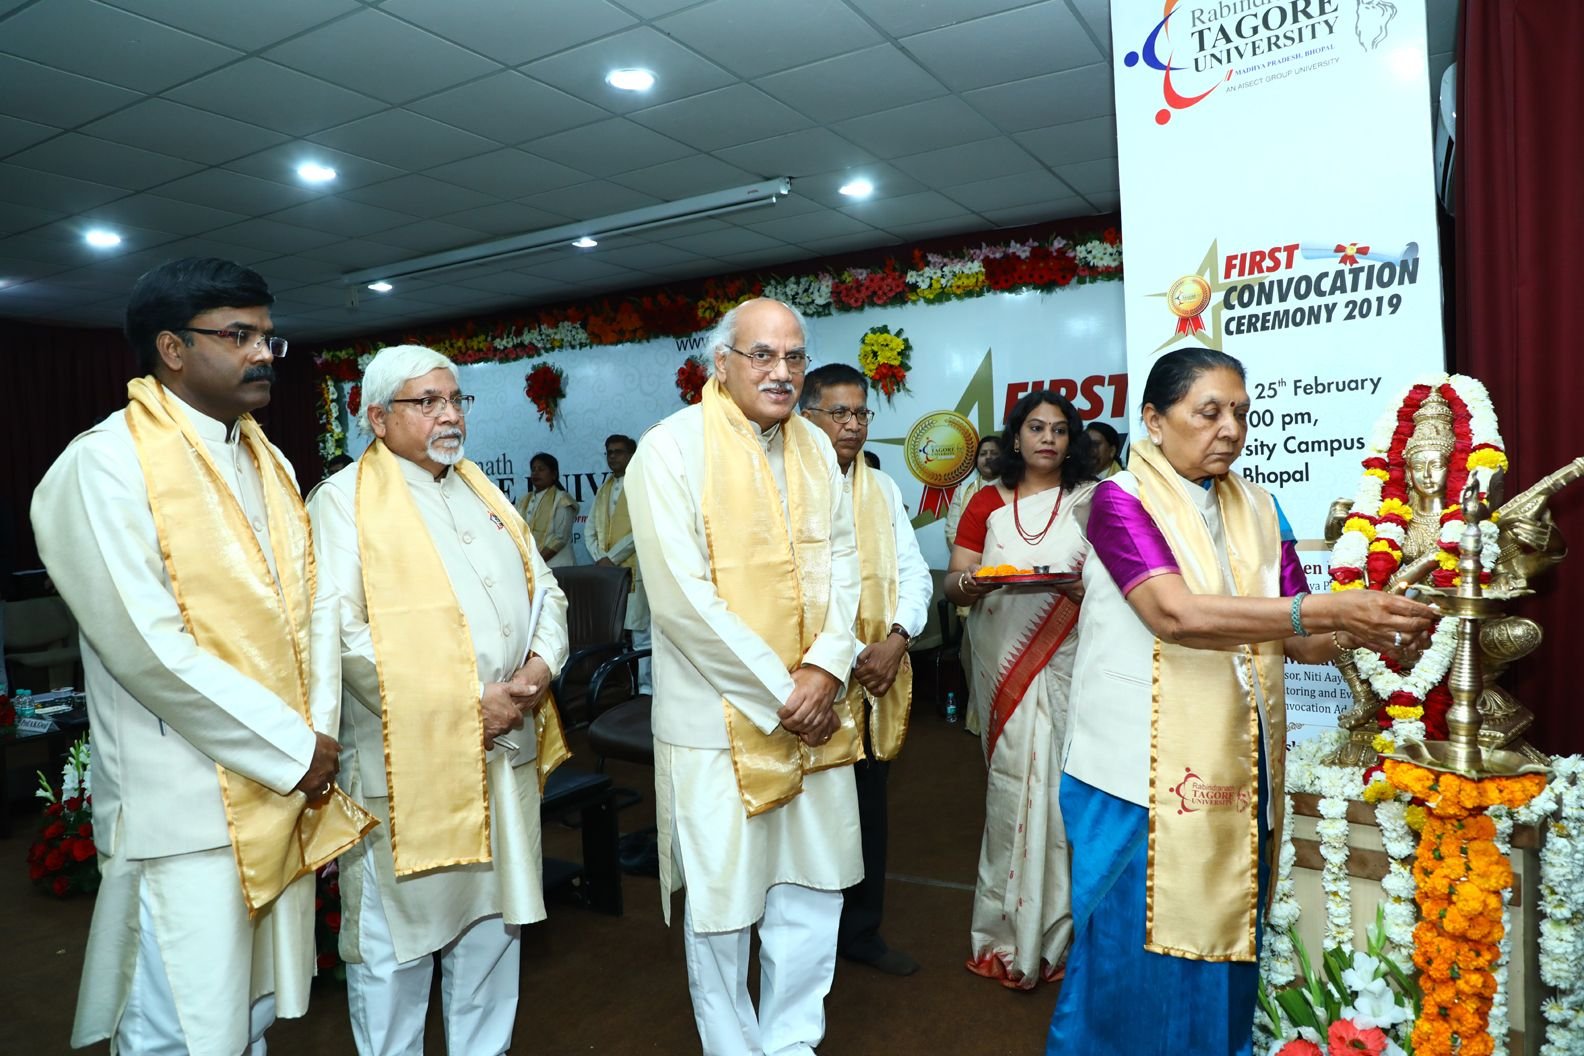 Programme  Rabindranath Tagore University (formerly known as AISECT University) in Bhopal